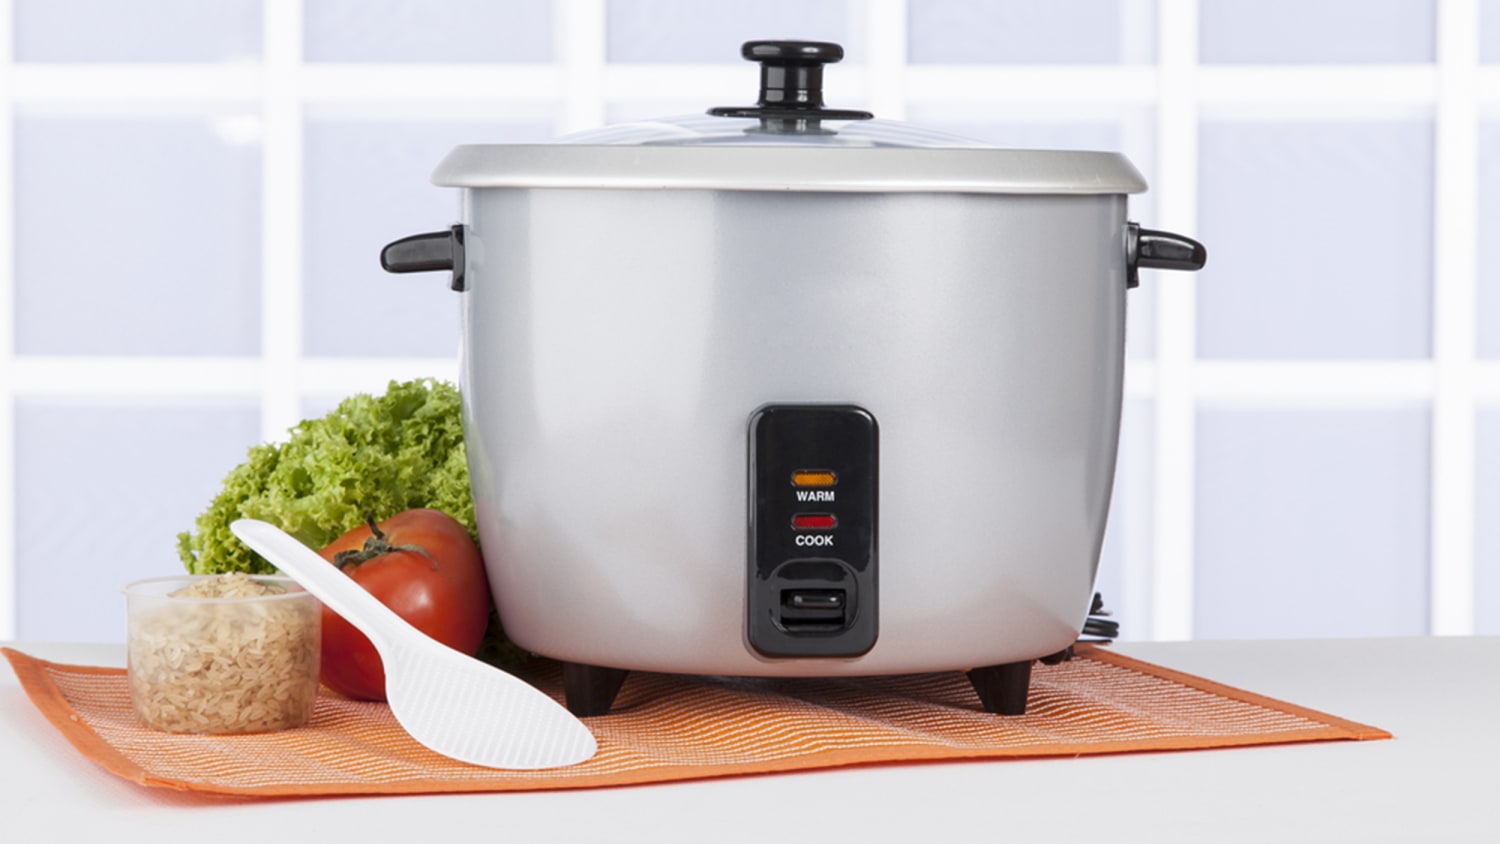 https://media-cldnry.s-nbcnews.com/image/upload/t_fit-1500w,f_auto,q_auto:best/newscms/2015_44/836716/rice-cooker-stock-today-151027-tease.jpg